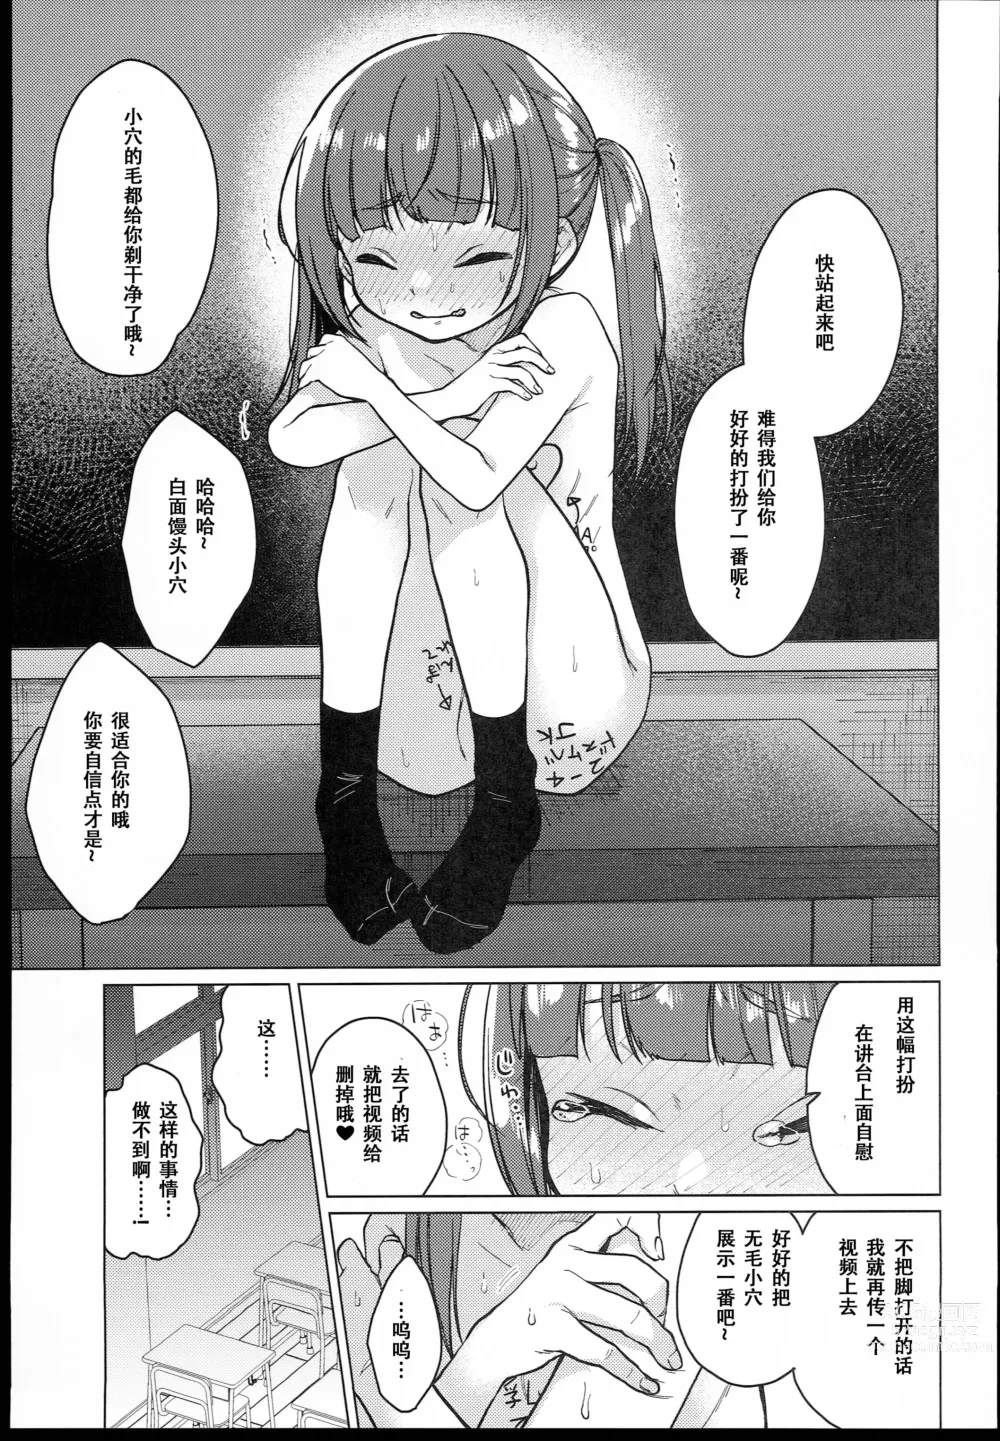 Page 9 of doujinshi 委員長は今日からみんなのオモチャ～終わった学校生活編～